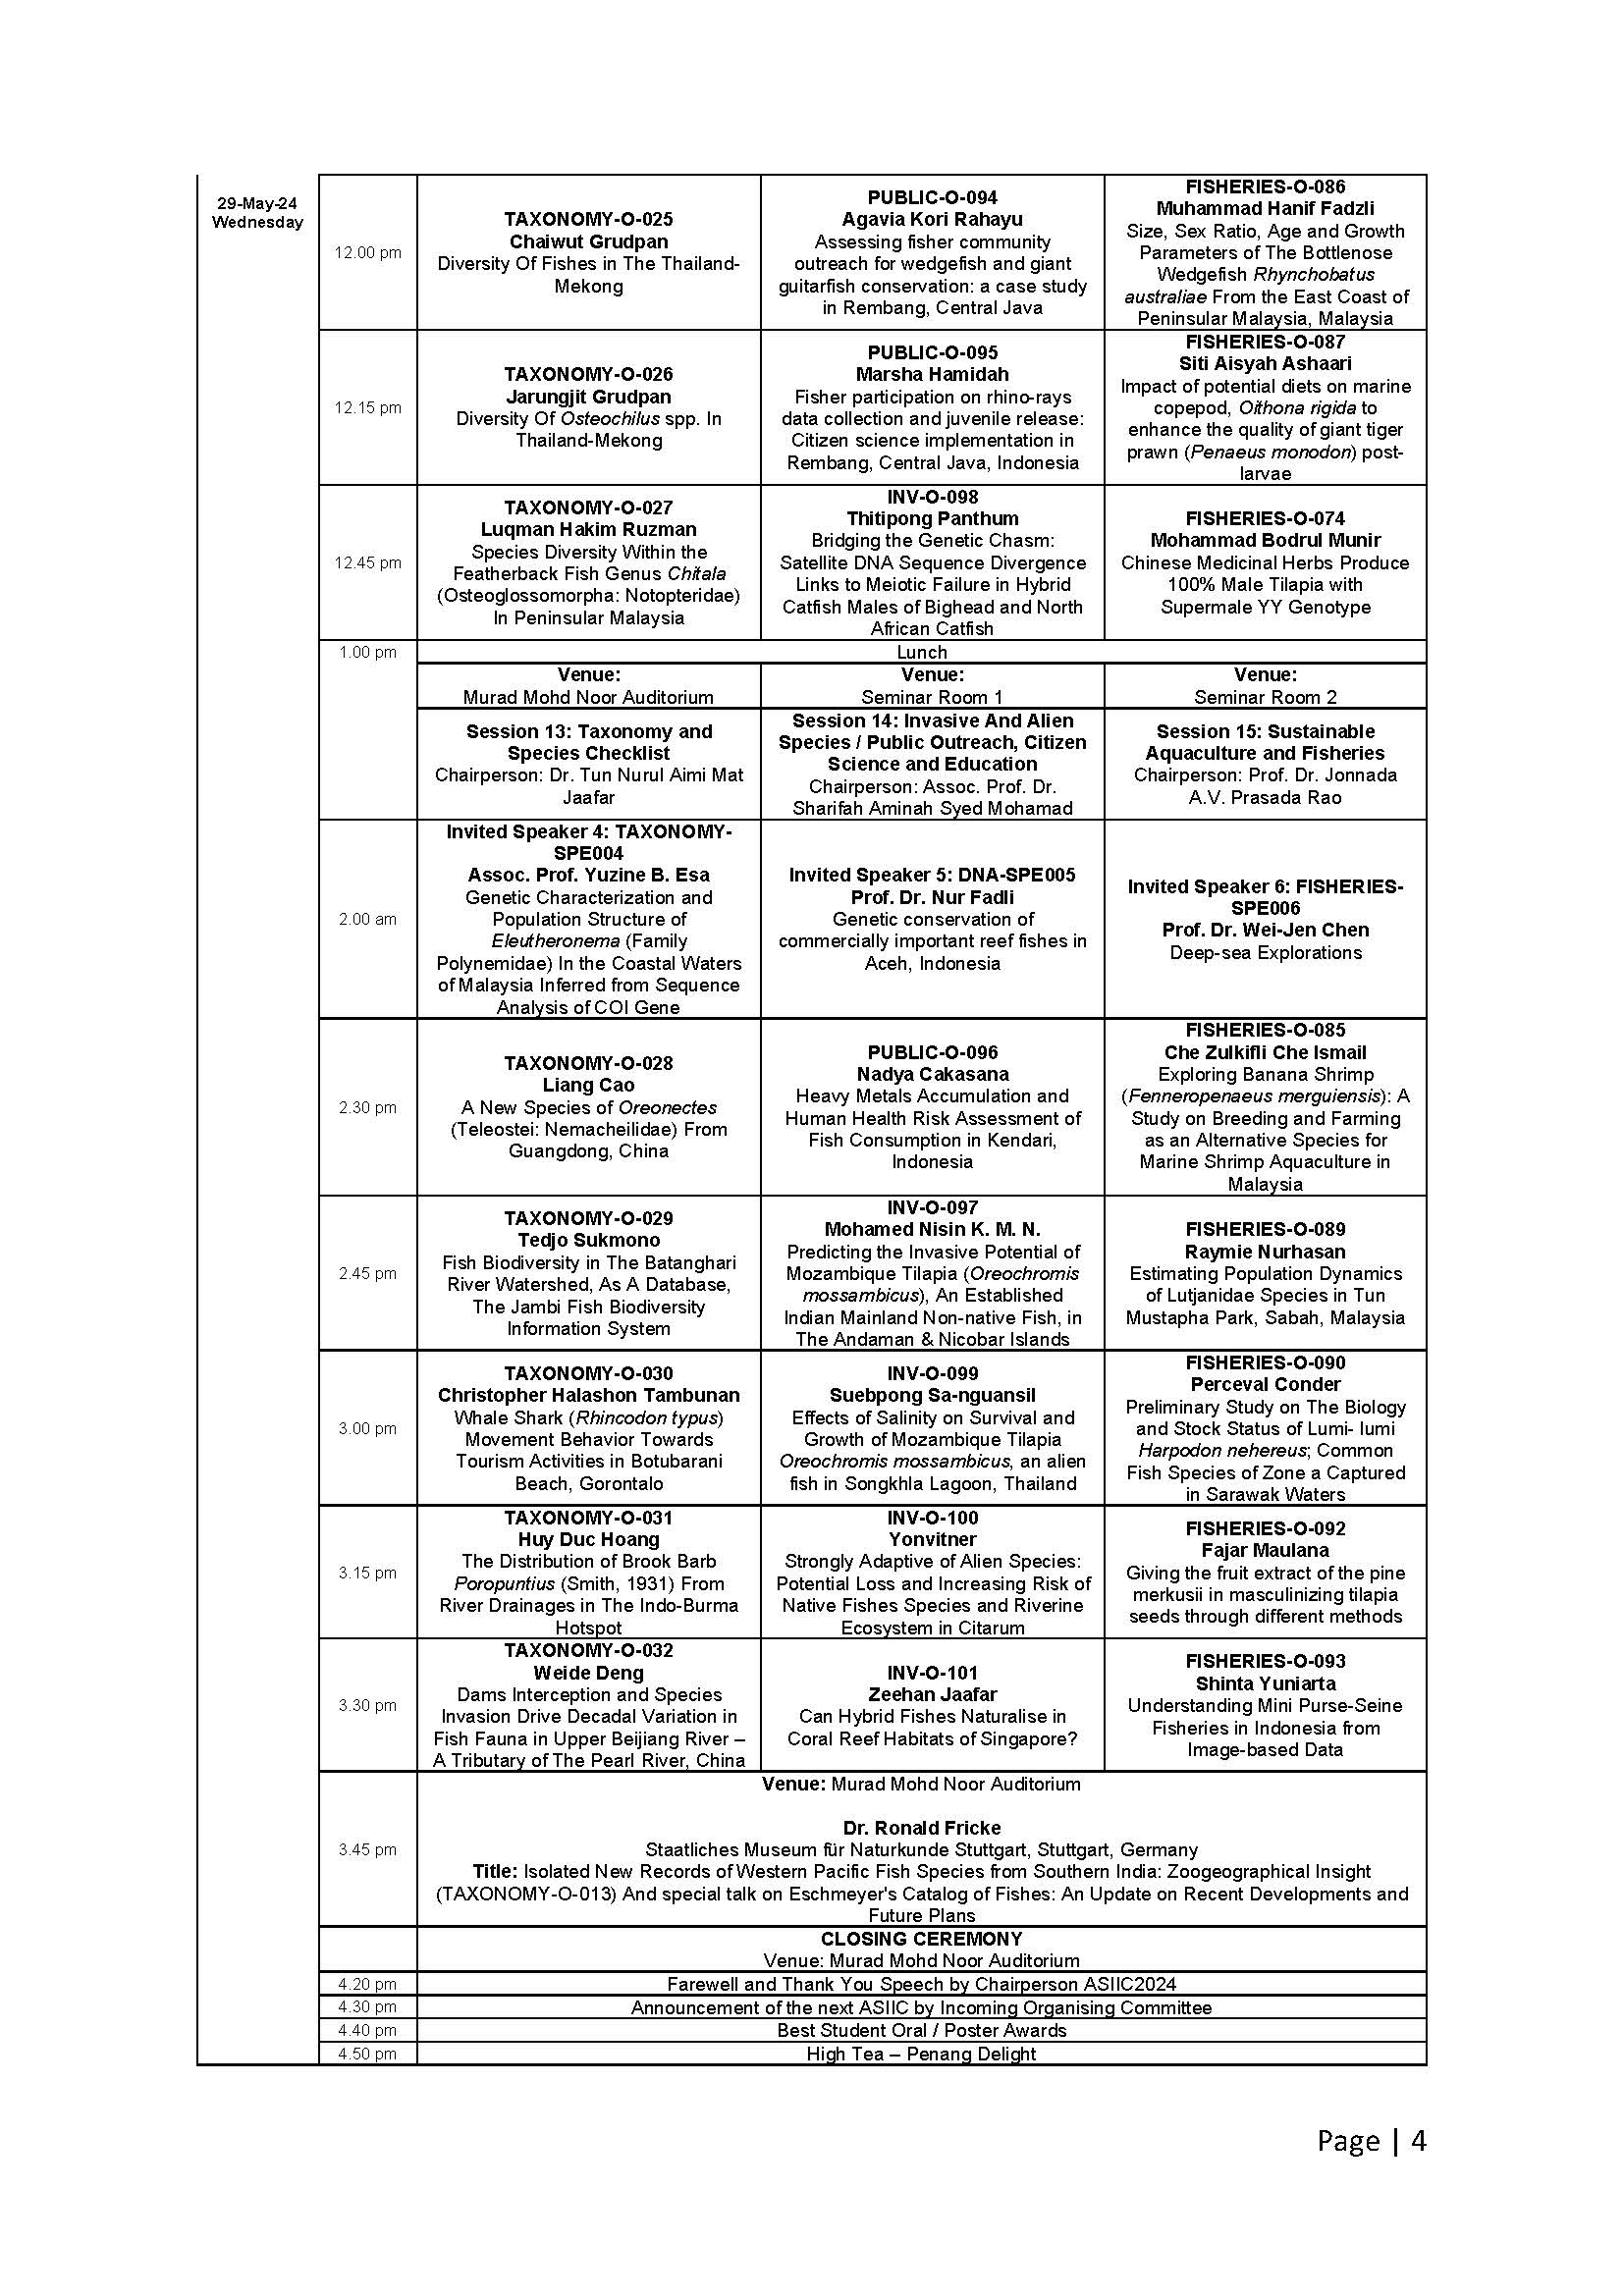 ASIIC2024 CONFERENCE AND ORAL PRESENTATION SCHEDULE Page 4